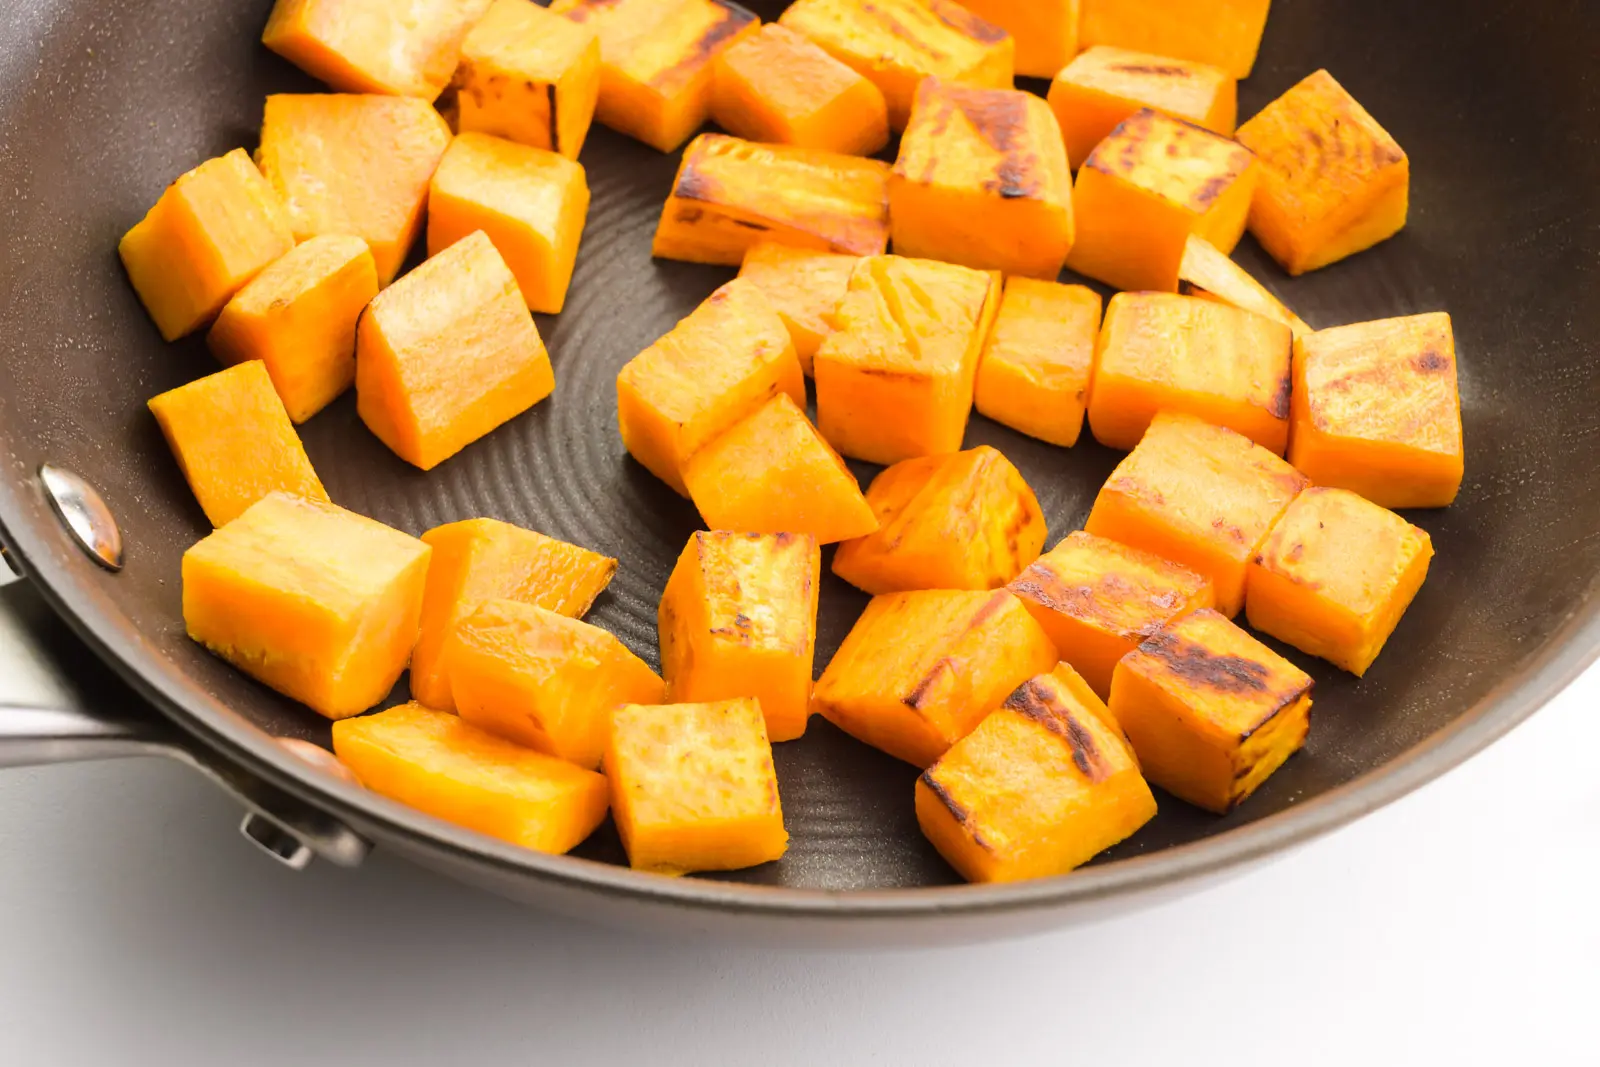 Sweet potato cubes are being sautéed in a skillet.